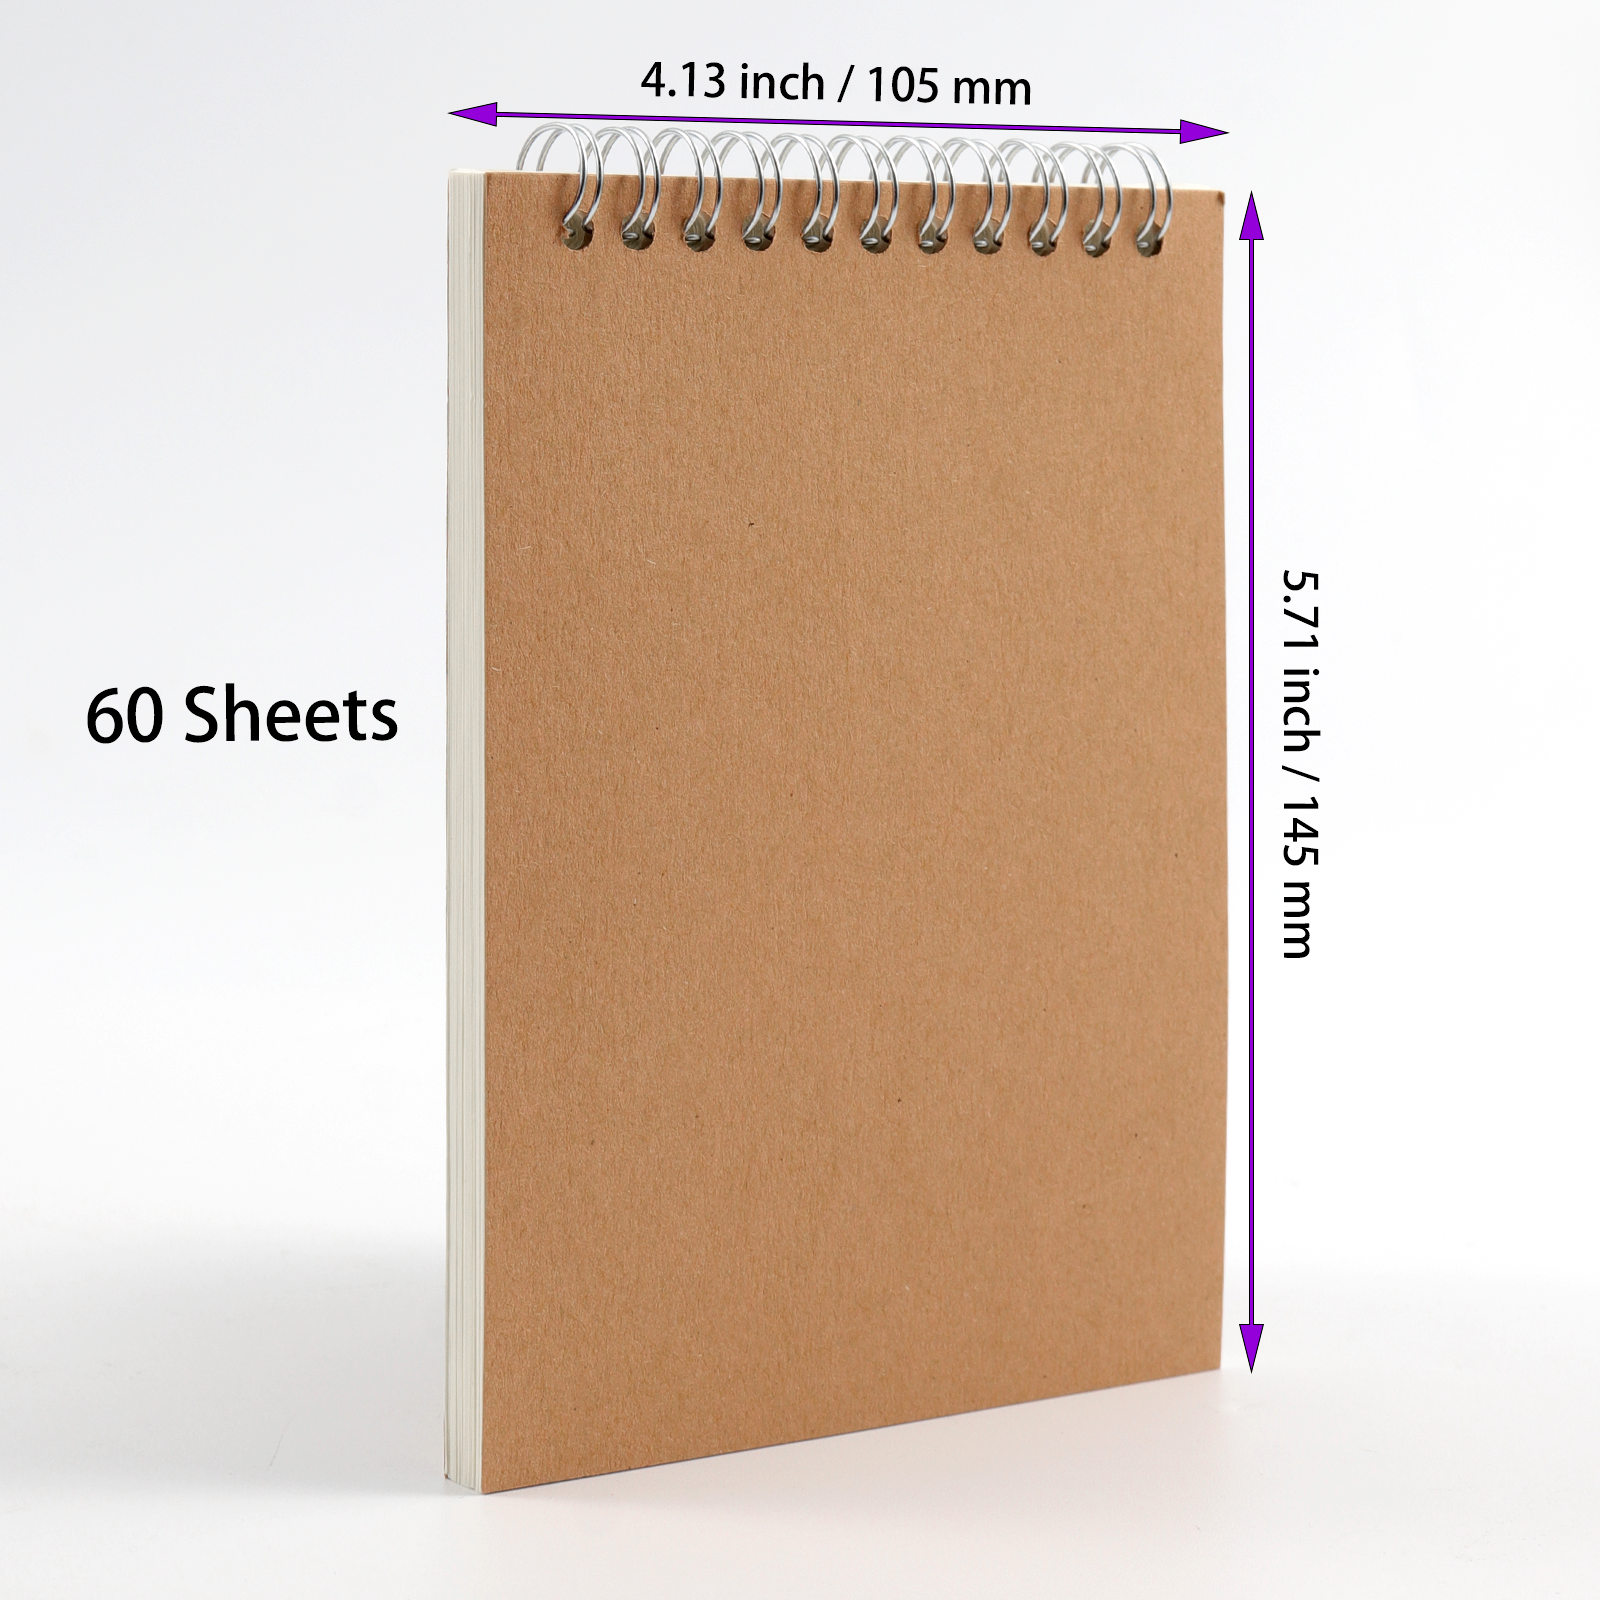 SEUNMUK 30 Pack A6 Spiral Bound Sketch Book, 4x5.7 inch Blank Drawing Sketch Pad Kraft Cover Spiral Notebook, 60 Sheets/120 Pages, Brown